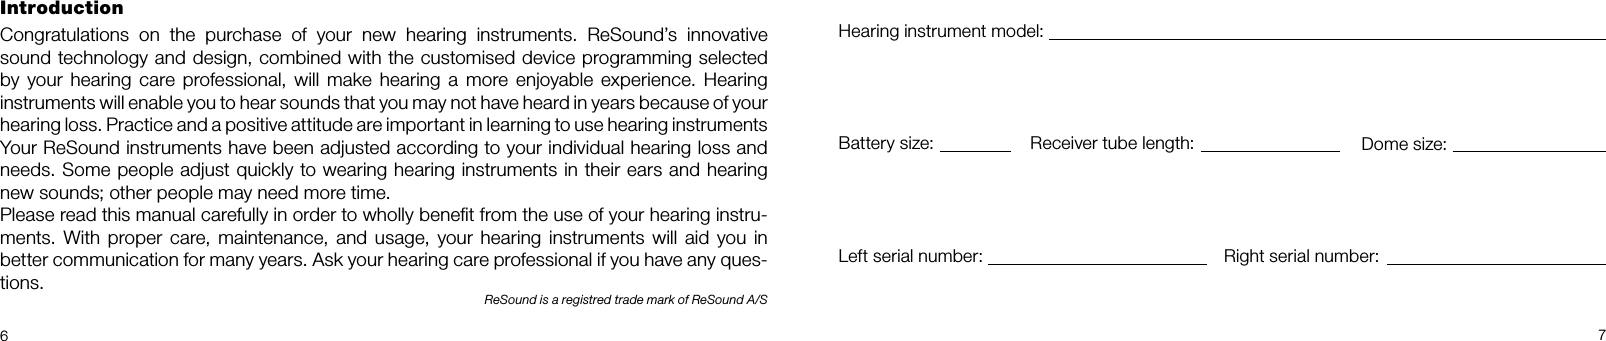 67IntroductionCongratulations on the purchase of your new hearing instruments. ReSound’s innovative  sound technology and design, combined with the customised device programming selected  by your hearing care professional, will make hearing a more enjoyable experience. Hearing  instruments will enable you to hear sounds that you may not have heard in years because of your  hearing loss. Practice and a positive attitude are important in learning to use hearing instruments   Your ReSound instruments have been adjusted according to your individual hearing loss and  needs. Some people adjust quickly to wearing hearing instruments in their ears and hearing new sounds; other people may need more time.Please read this manual carefully in order to wholly beneﬁt from the use of your hearing instru-ments. With proper care, maintenance, and usage, your hearing instruments will aid you in better communication for many years. Ask your hearing care professional if you have any ques-tions.ReSound is a registred trade mark of ReSound A/SHearing instrument model:Battery size: Receiver tube length: Dome size:Left serial number: Right serial number: